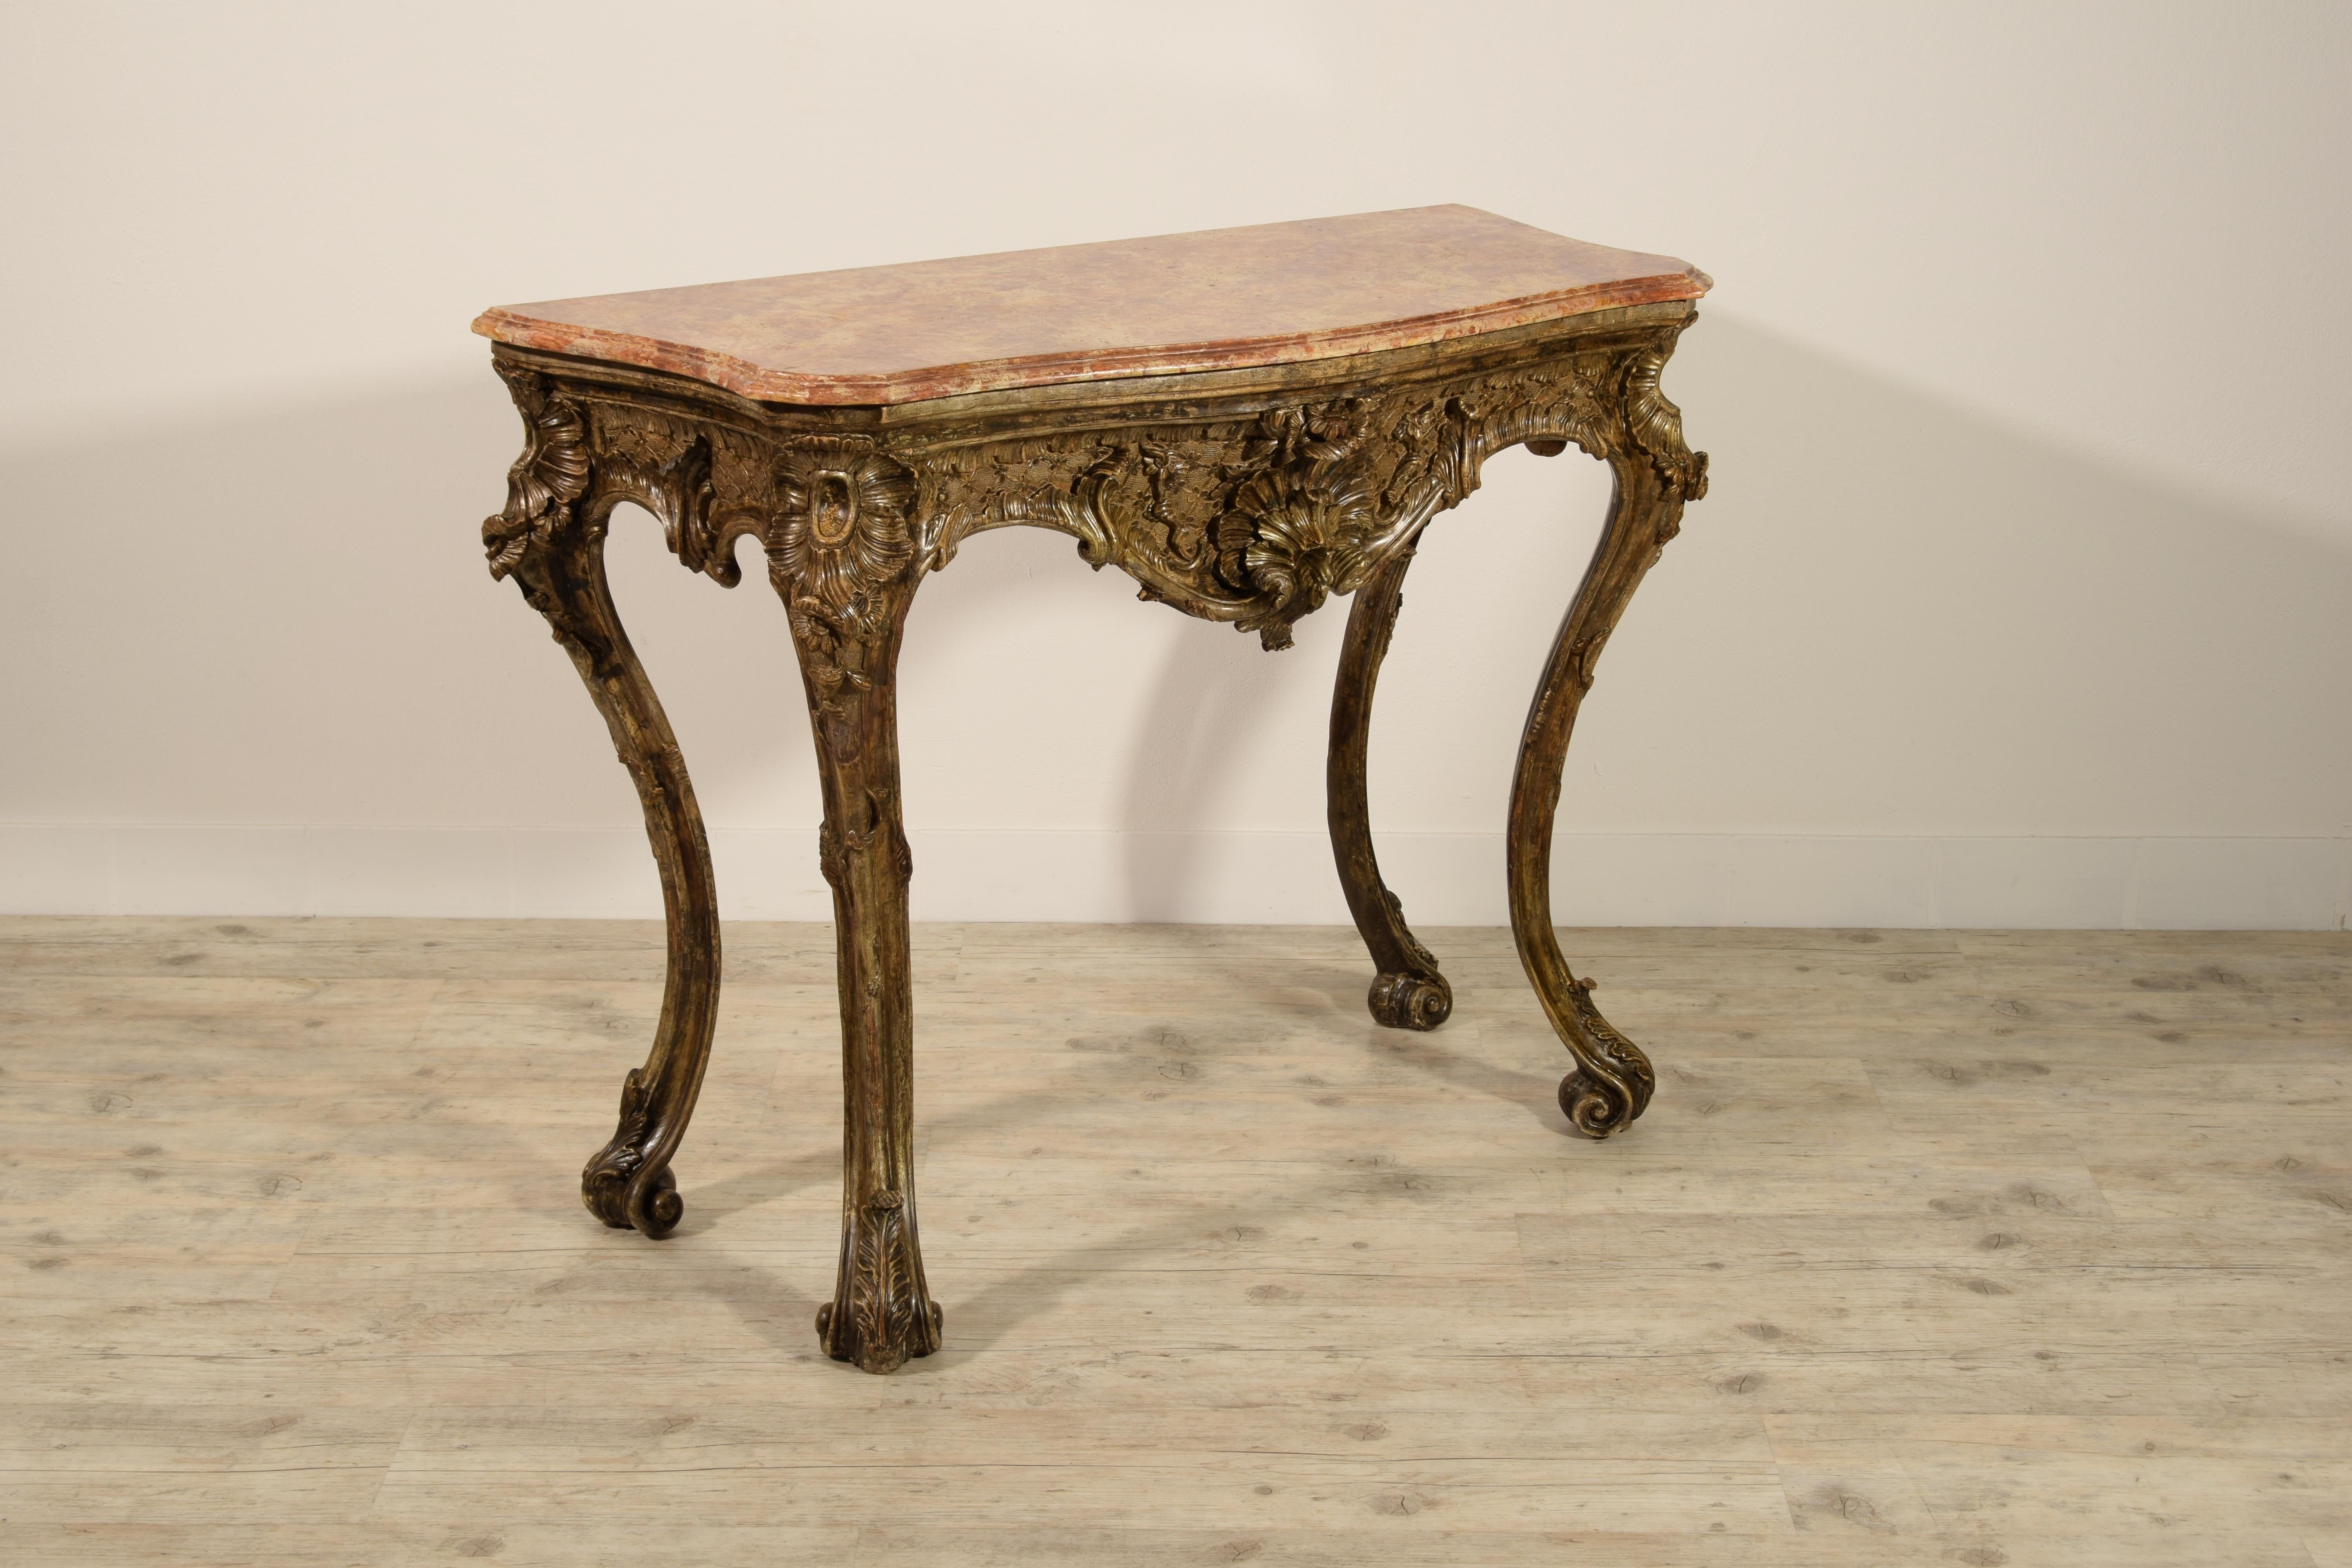 18th century, Italian Naples baroque carved wood console

This console made of richly carved and gilded with “Mecca” wood, is a characteristic example of the decorative repertoire widespread in Naples in baroque cabinet-making around the first